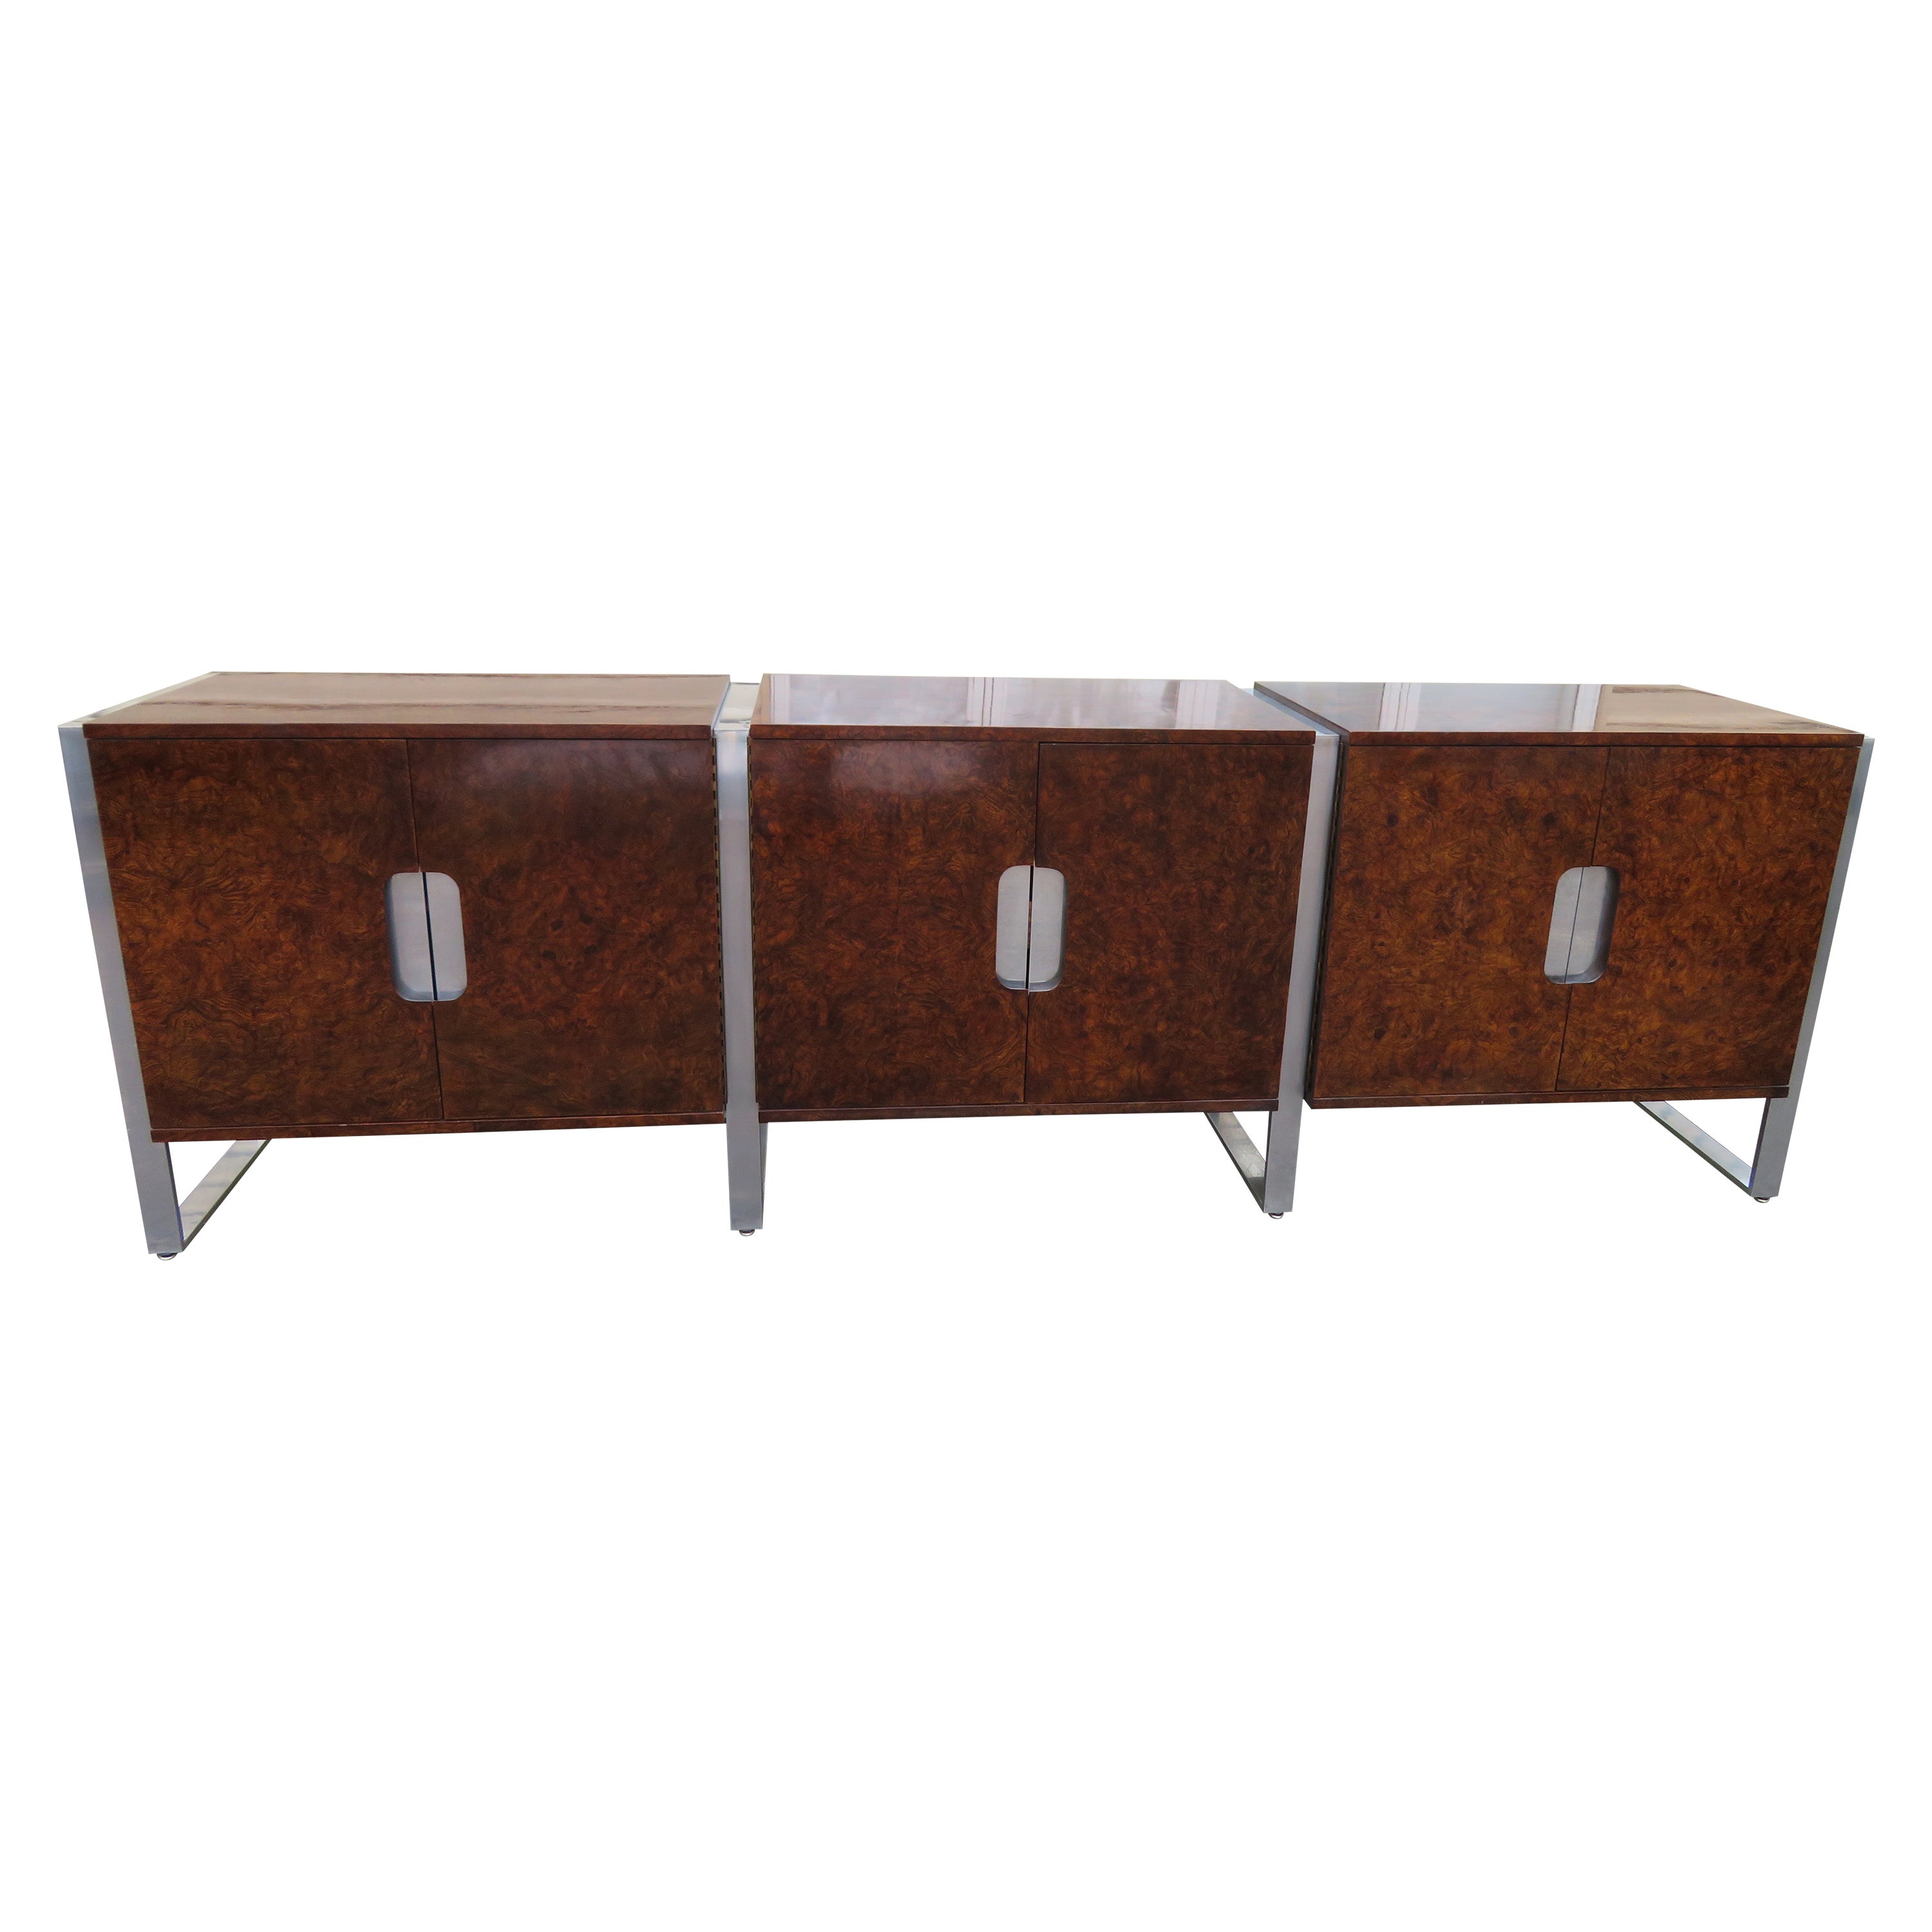 Marvelous Pace Collection 3 Piece Burled Walnut Aluminum Credenza Mid-Century 